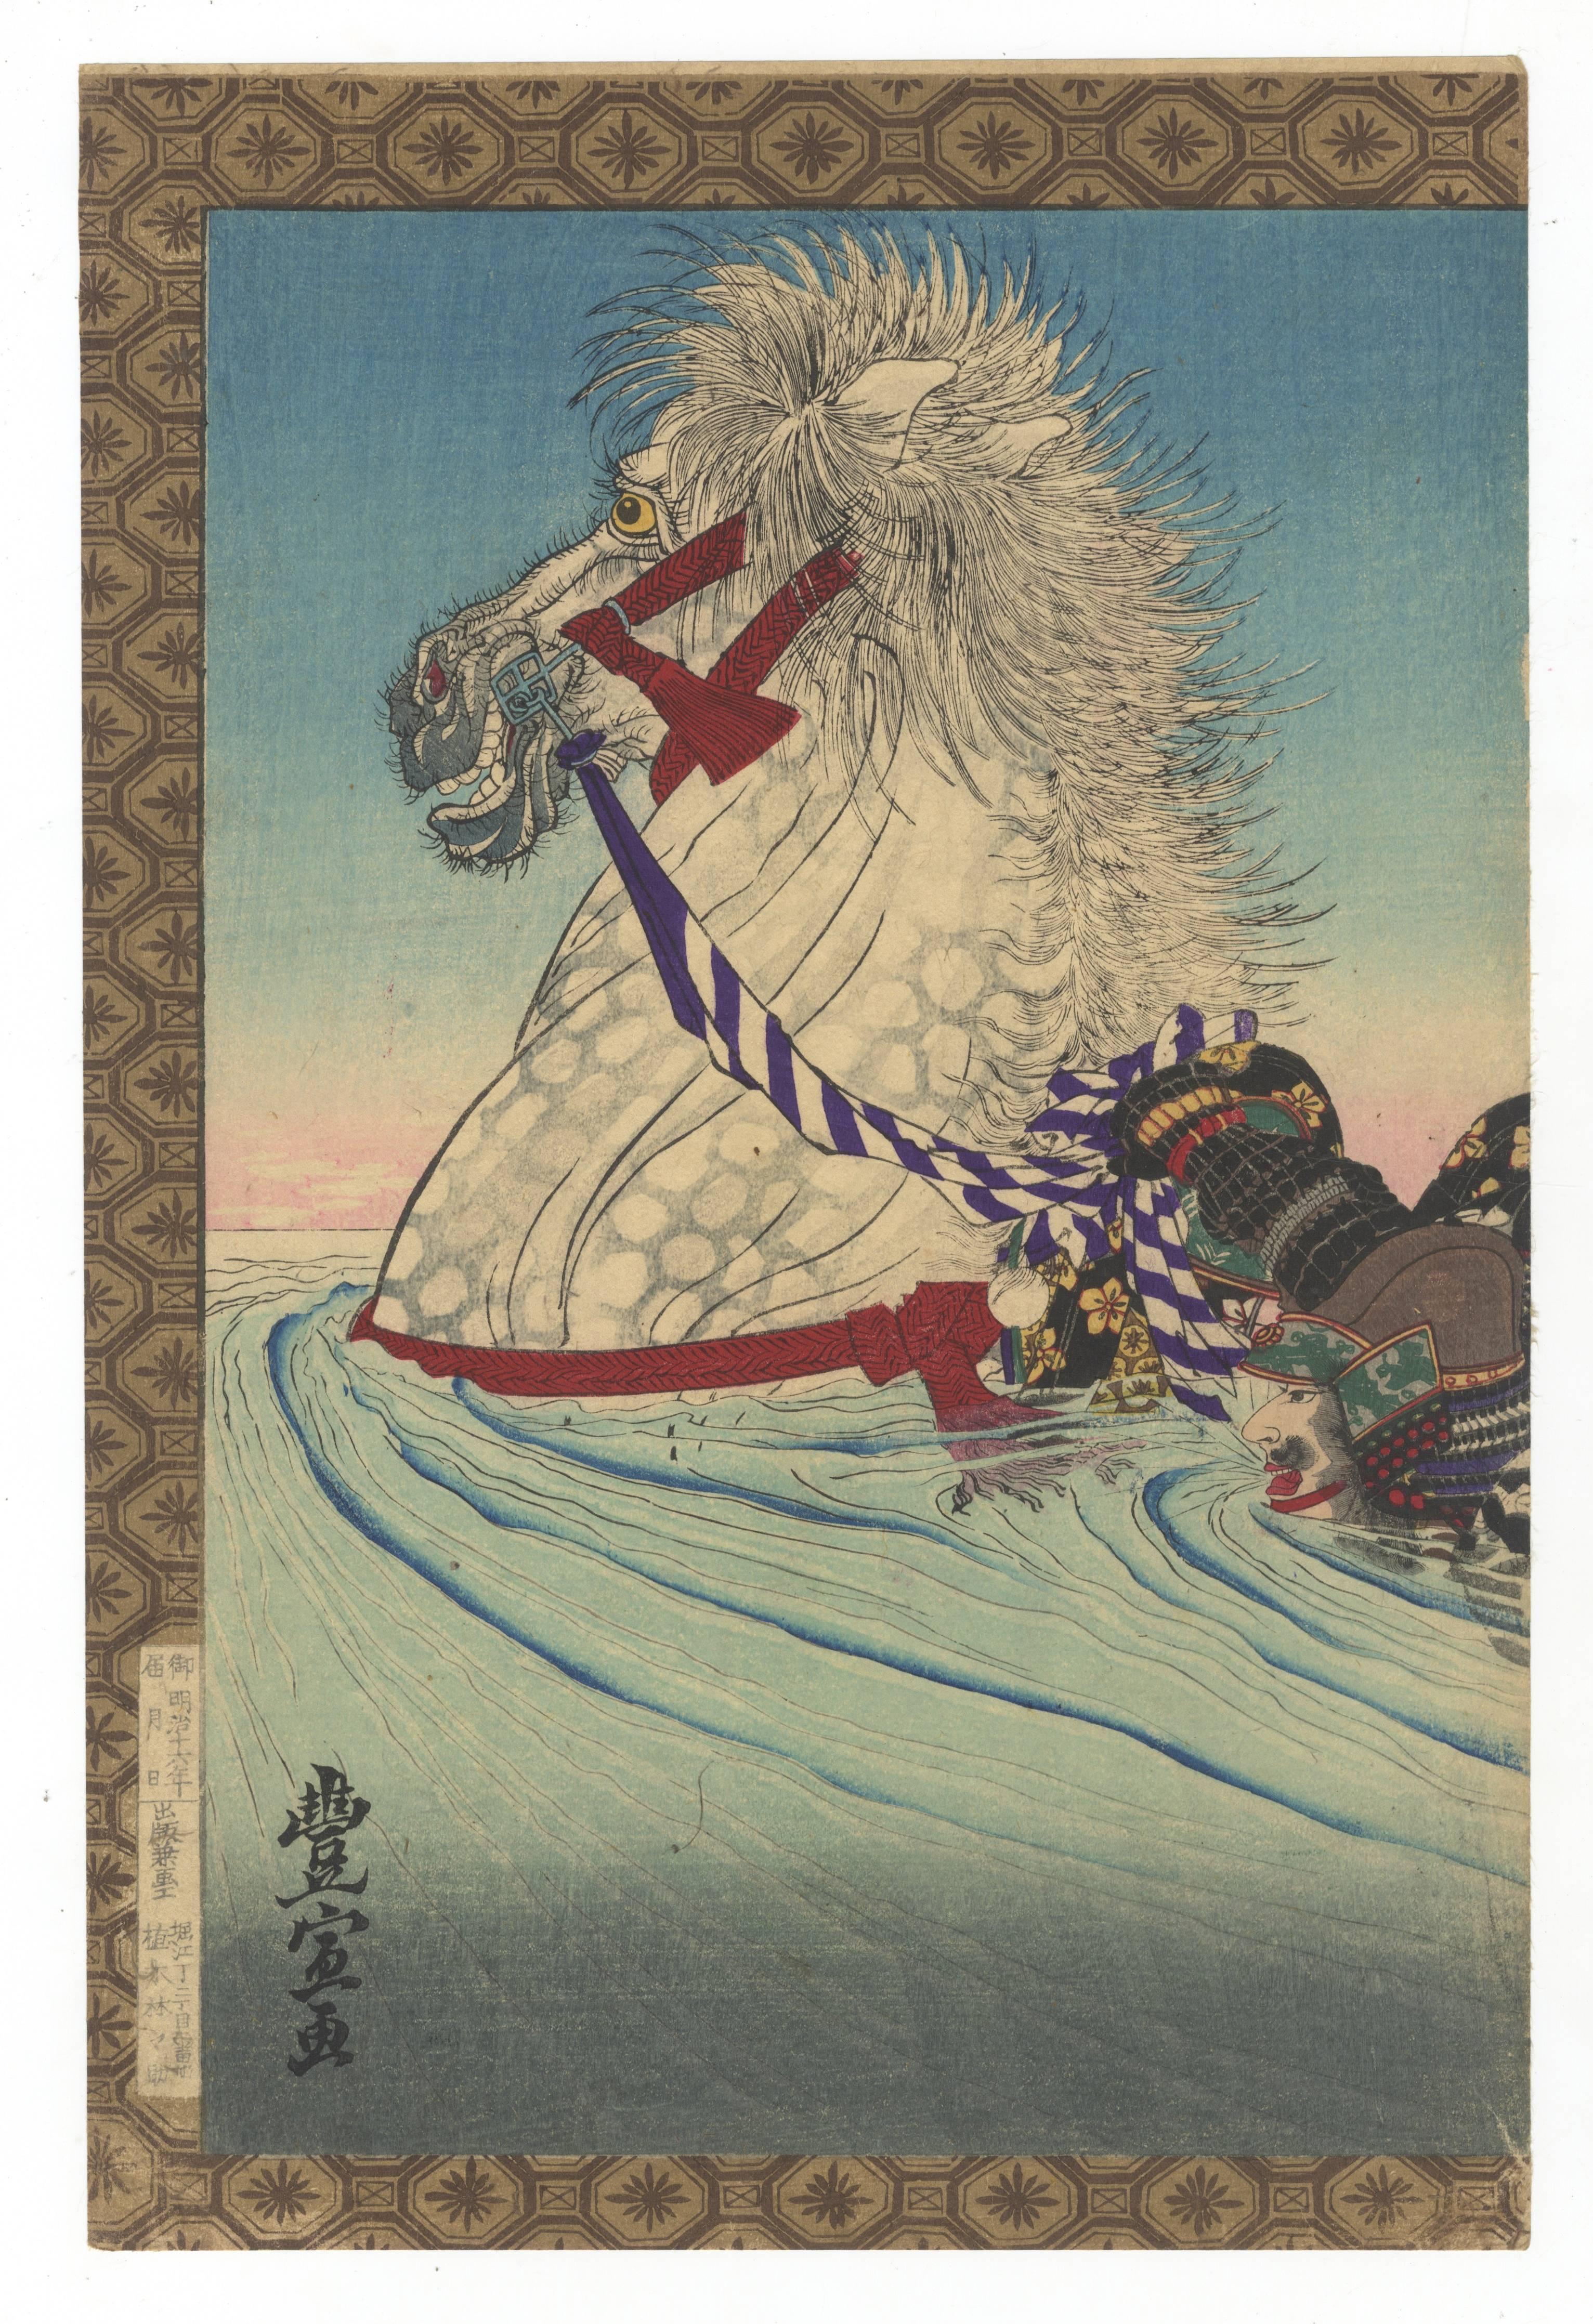 Artist: Utagawa Toyonobu (1859-1896)
Title: Lord Akechi Crossing the River
Series: The New Biography of Toyotomi Hideyoshi
Publisher: Matsuki Heikichi

Lord Akechi is a historical figure who led the attack on Battle of Honno-ji in which Oda